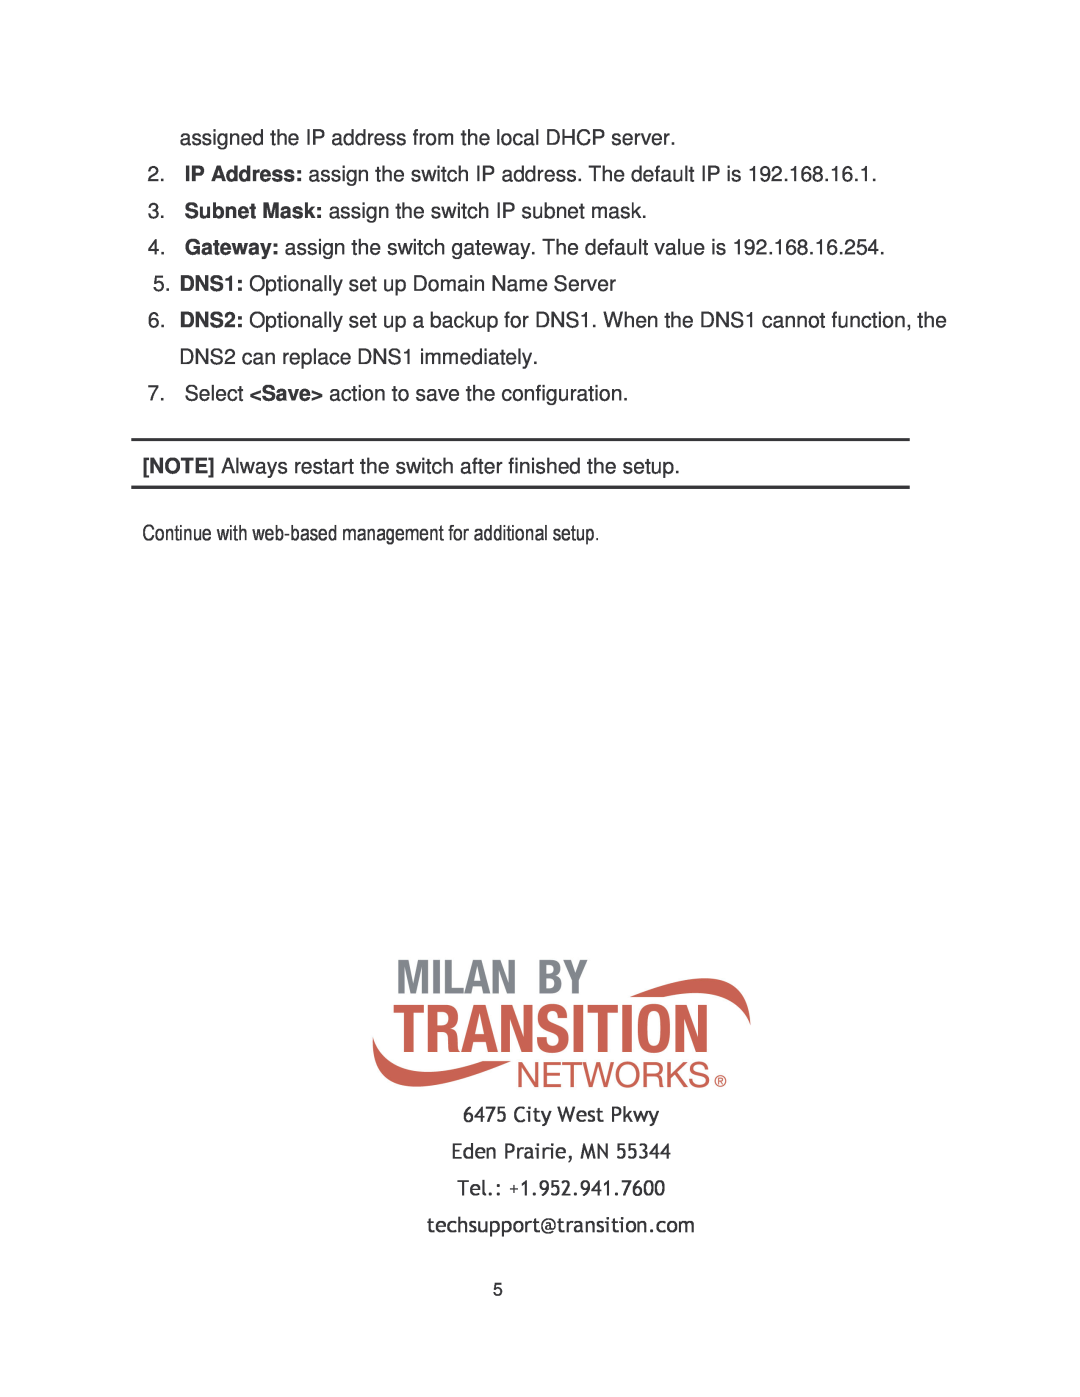 Transition Networks MIL-SM8002TG manual assigned the IP address from the local DHCP server 